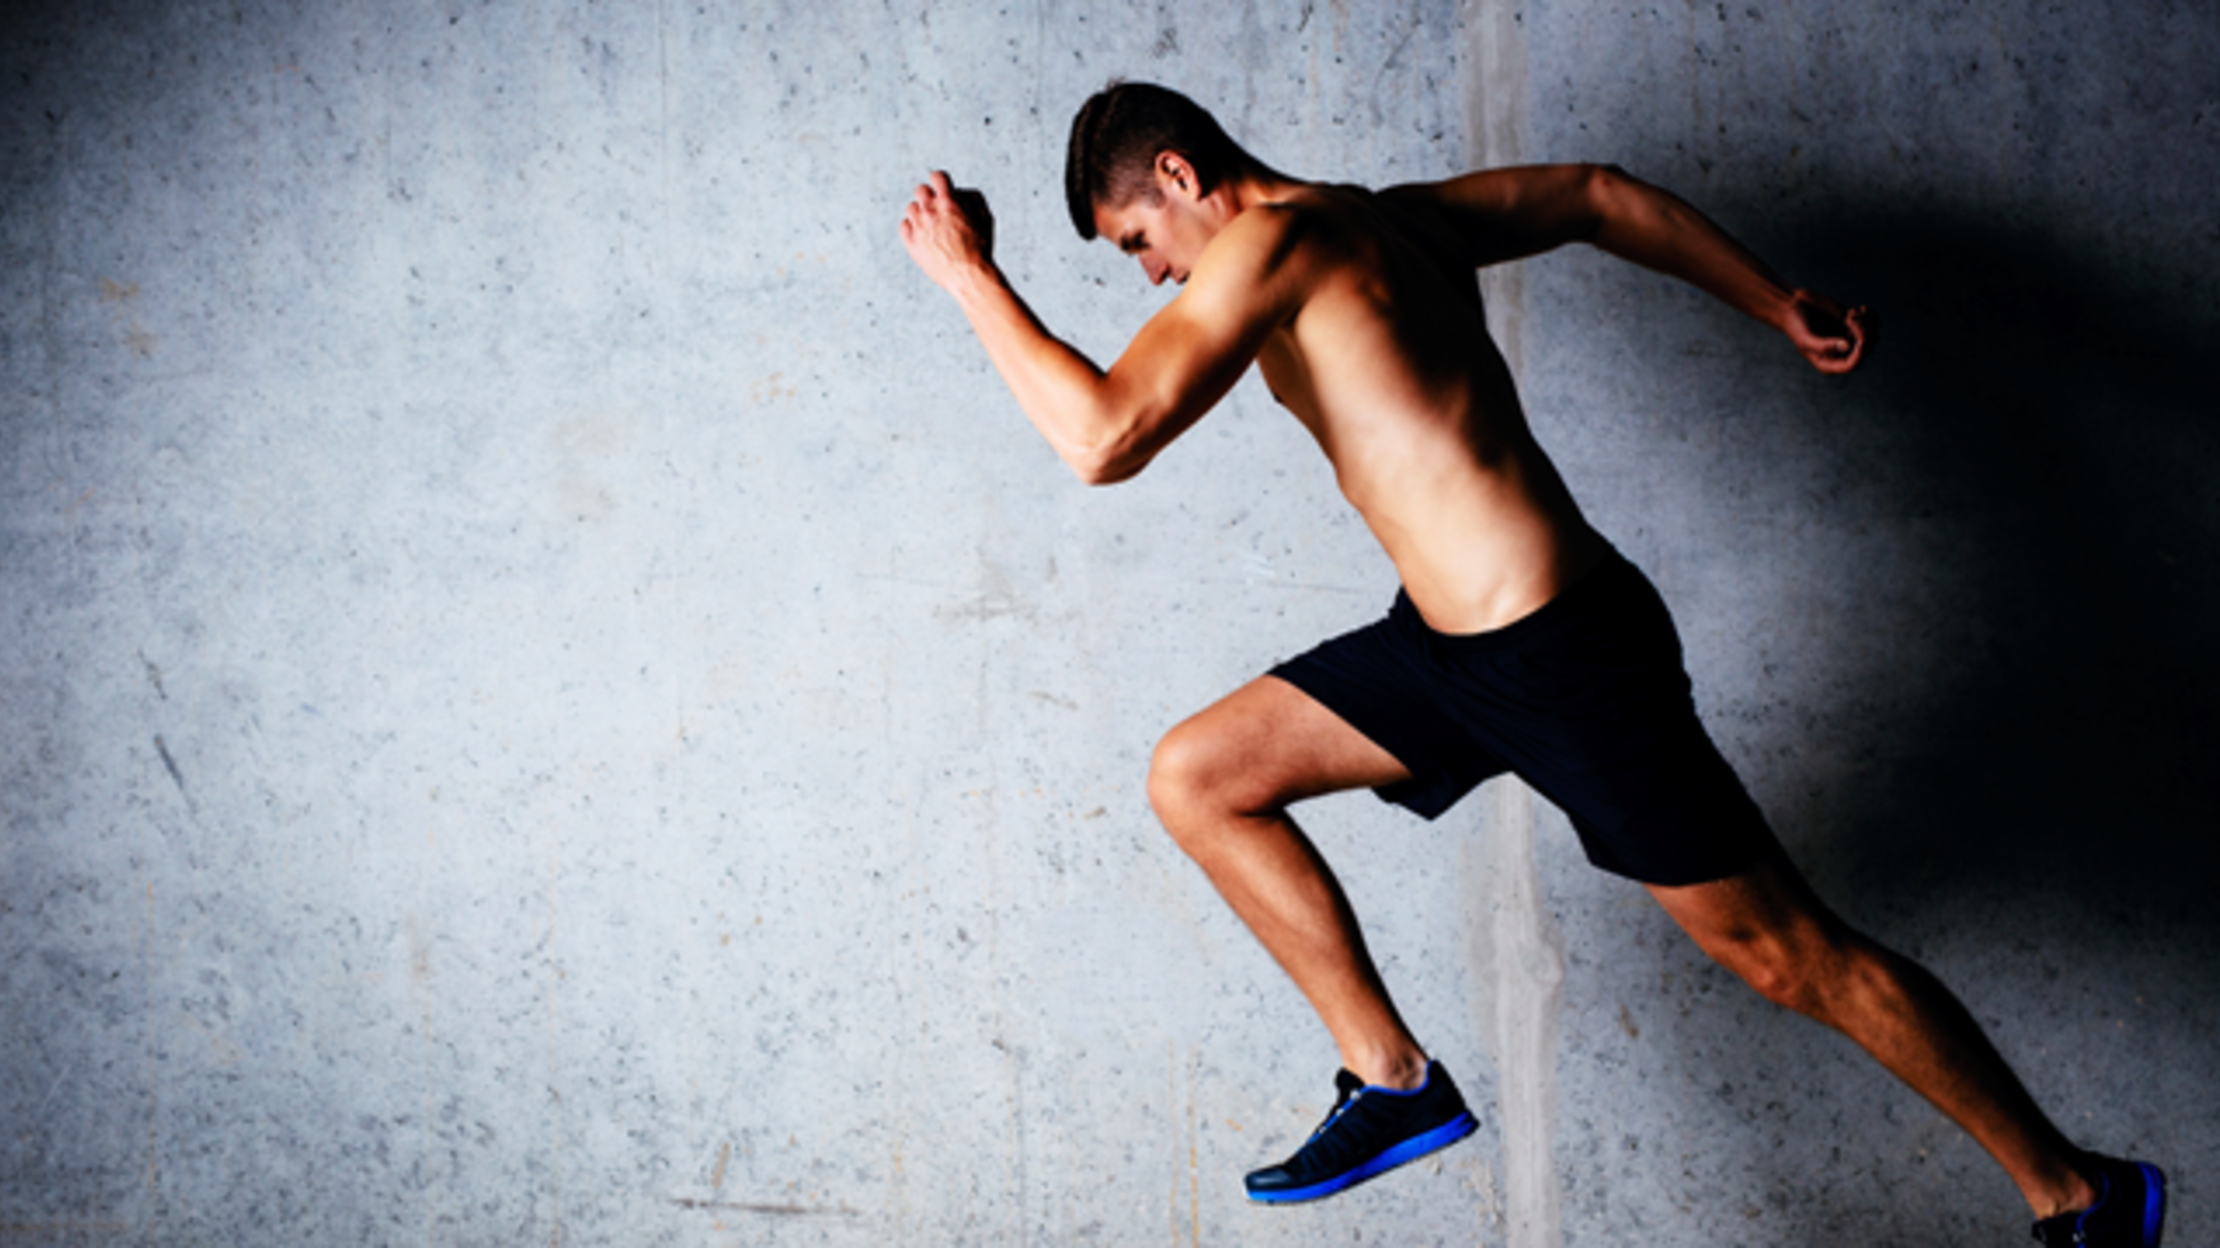 Just One Minute Of Intense Exercise May Improve Your Fitness Levels Mental Floss 6602